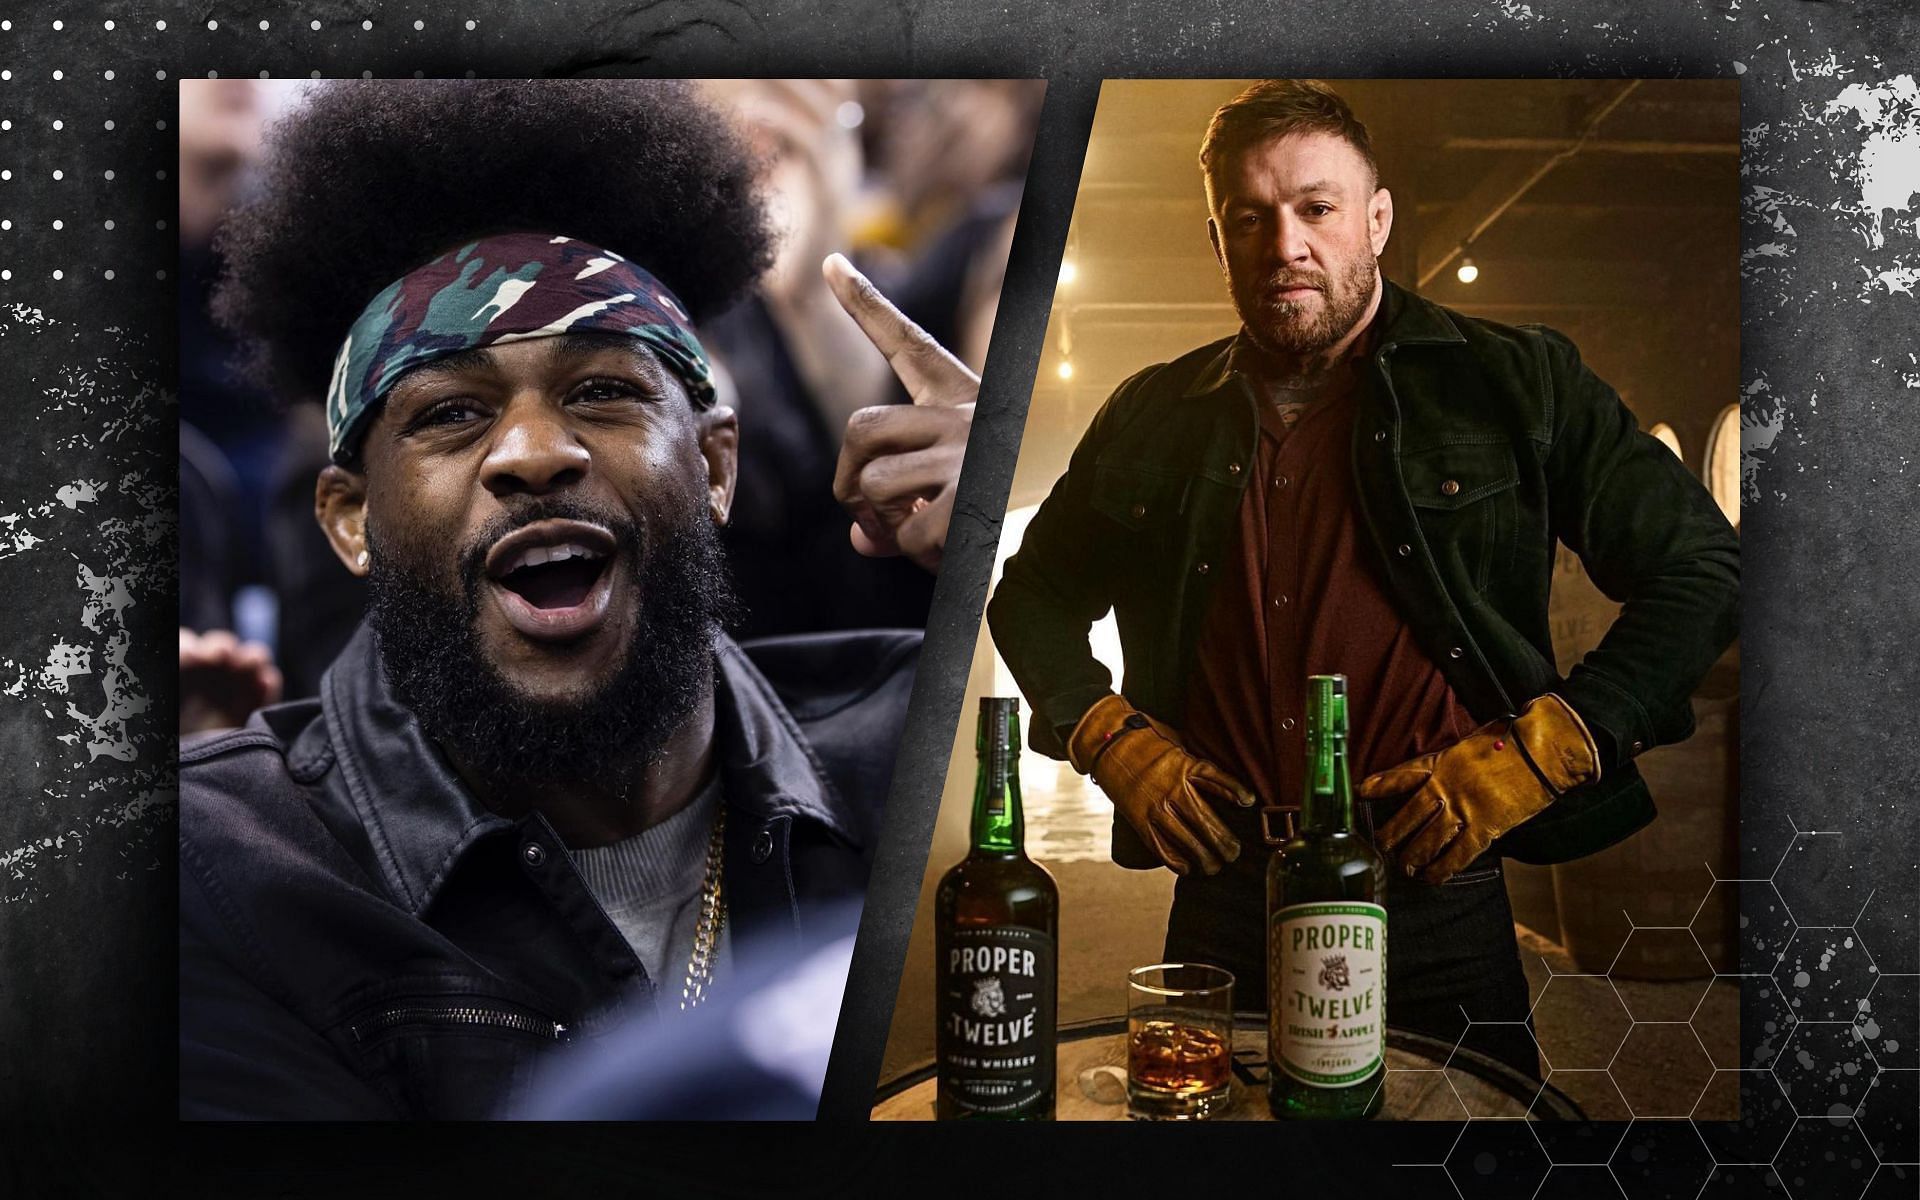 Aljamain Sterling plans to launch his own rum brand with Conor McGregor&rsquo;s help. [Image credits: @thenotoriousmma and @funkmastermma on Instagram]